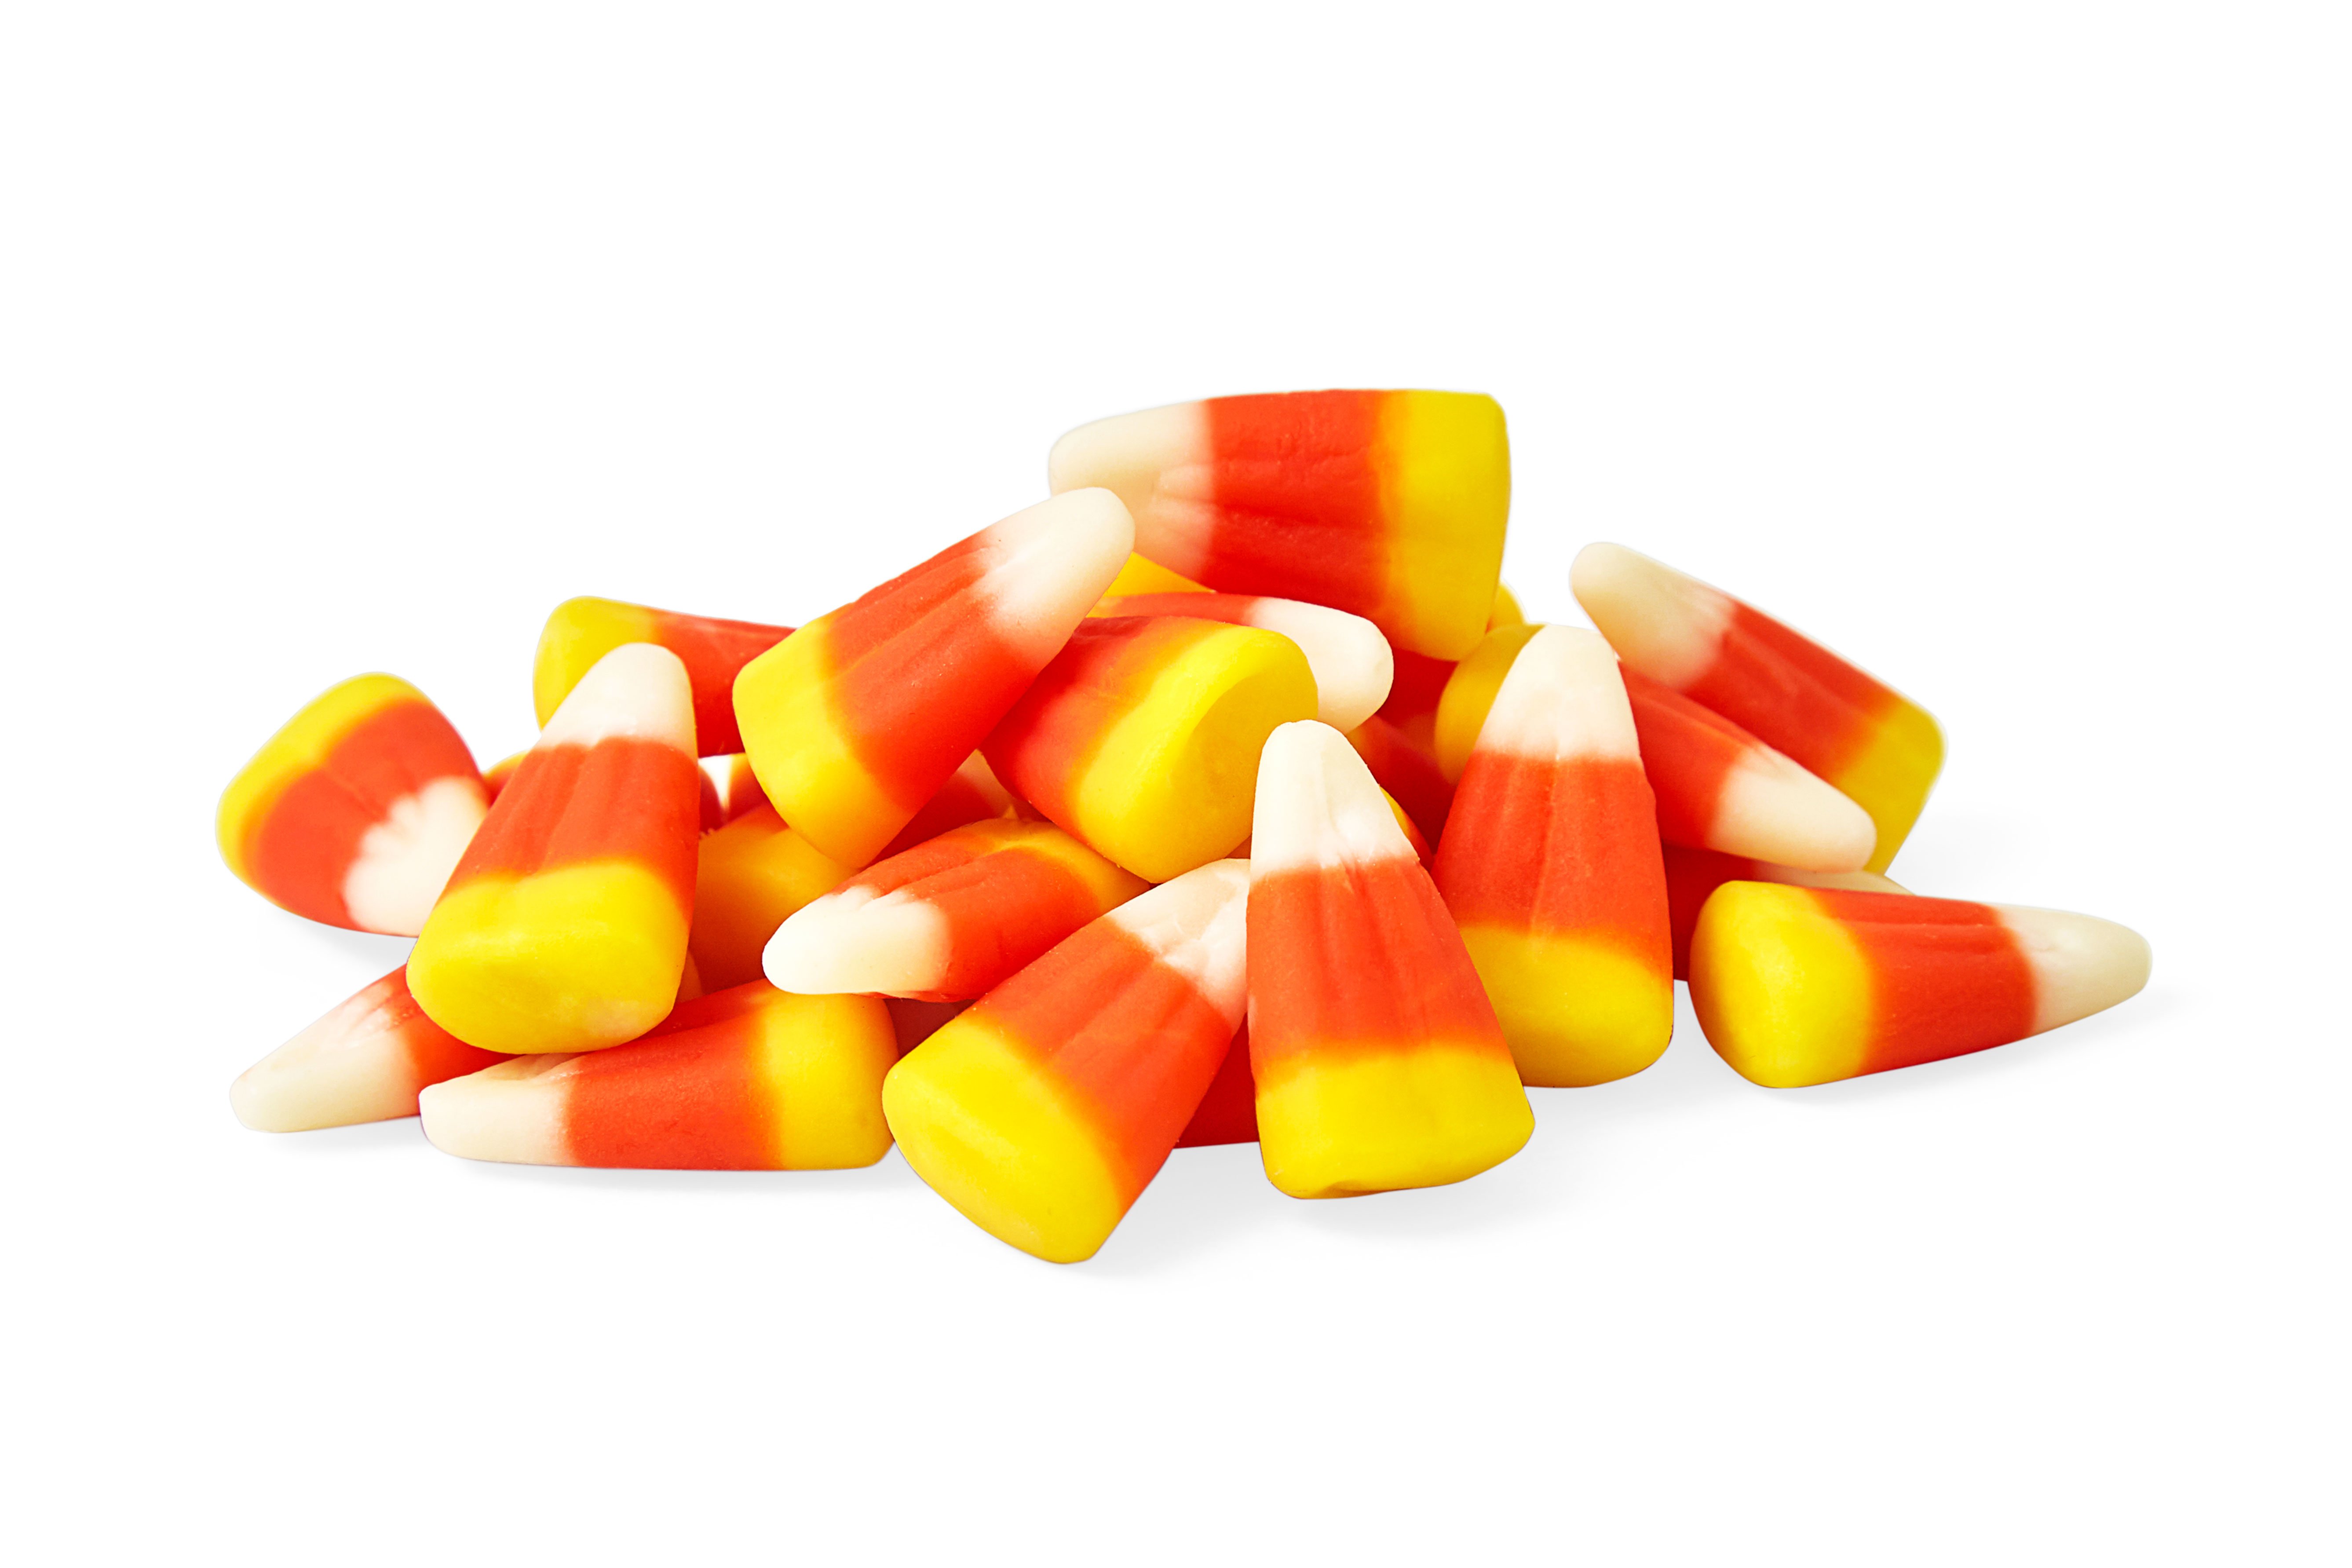 A lot of Candy Corn, maybe too much candy corn…